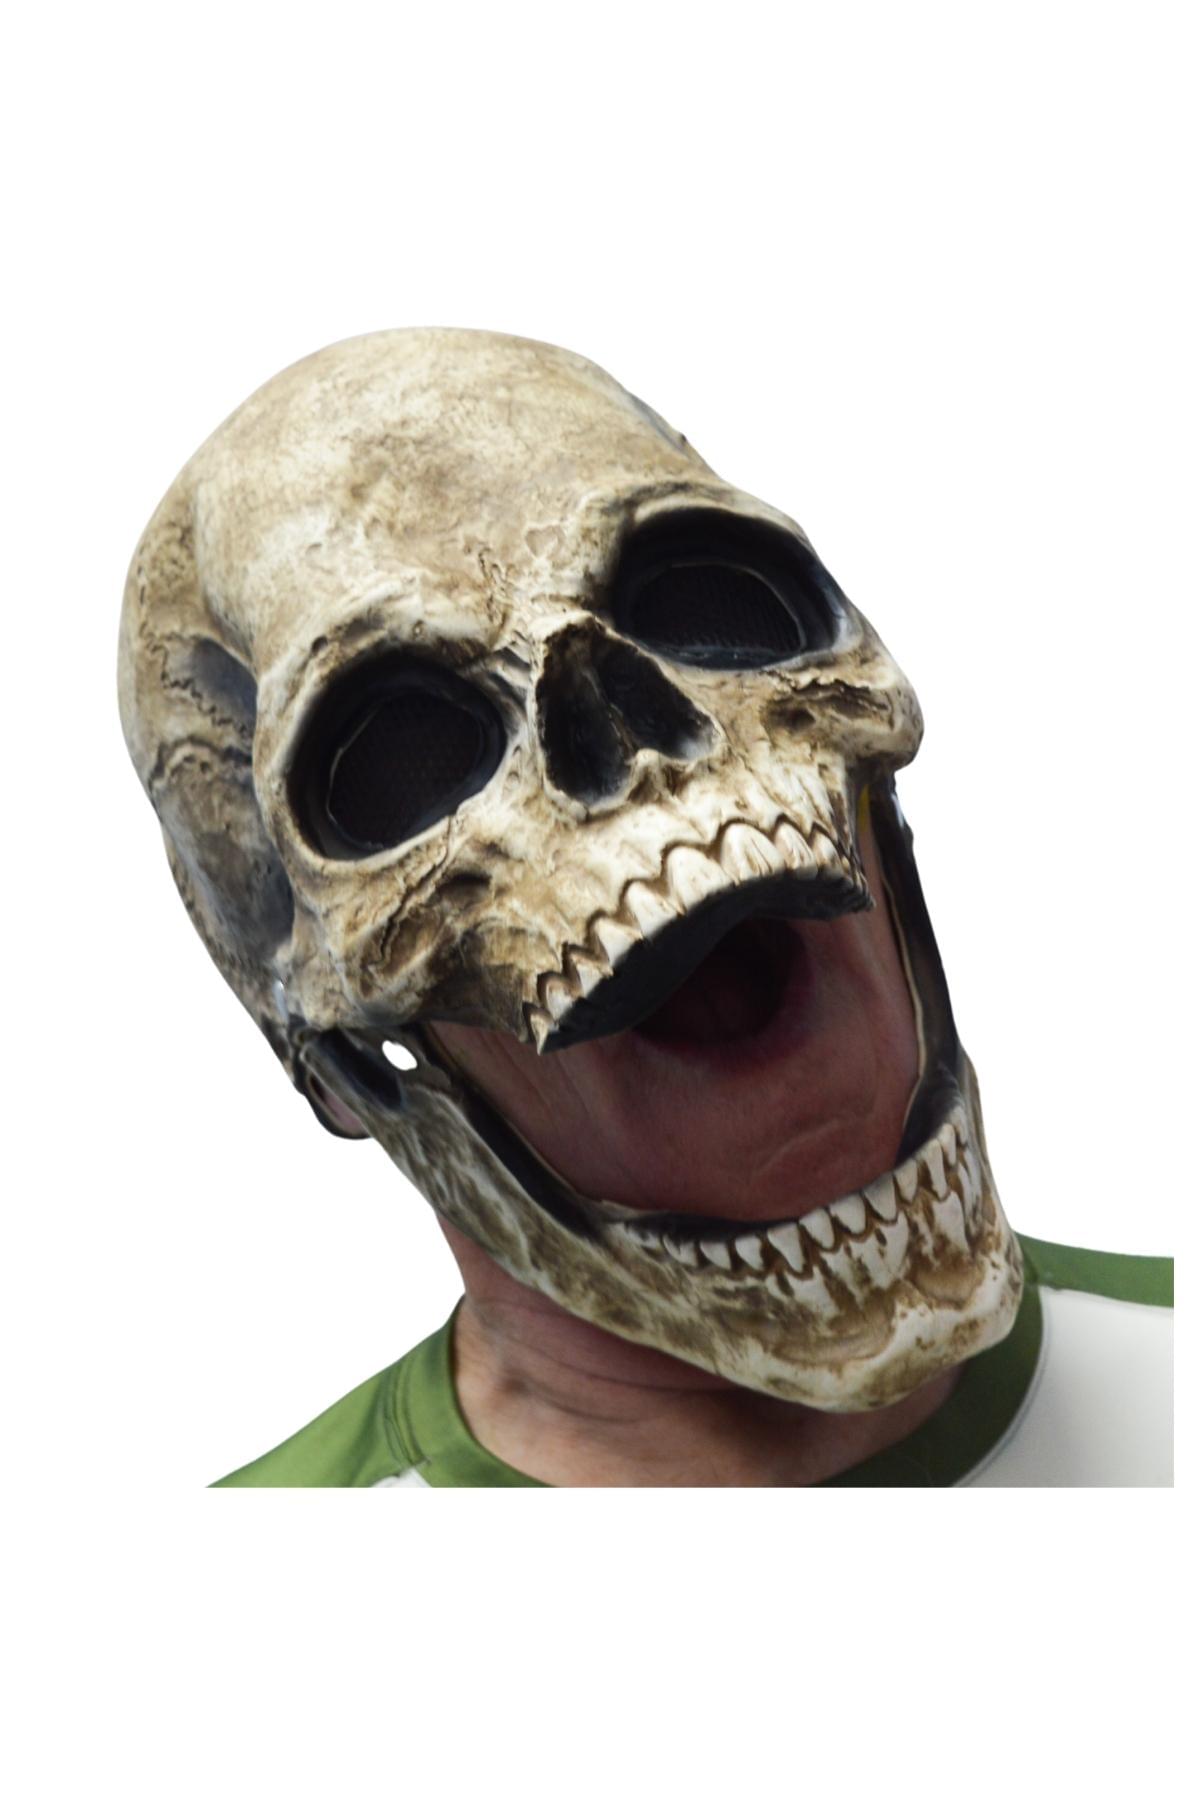 Latex Moving Mouth Skull Adult Costume Mask | One Size